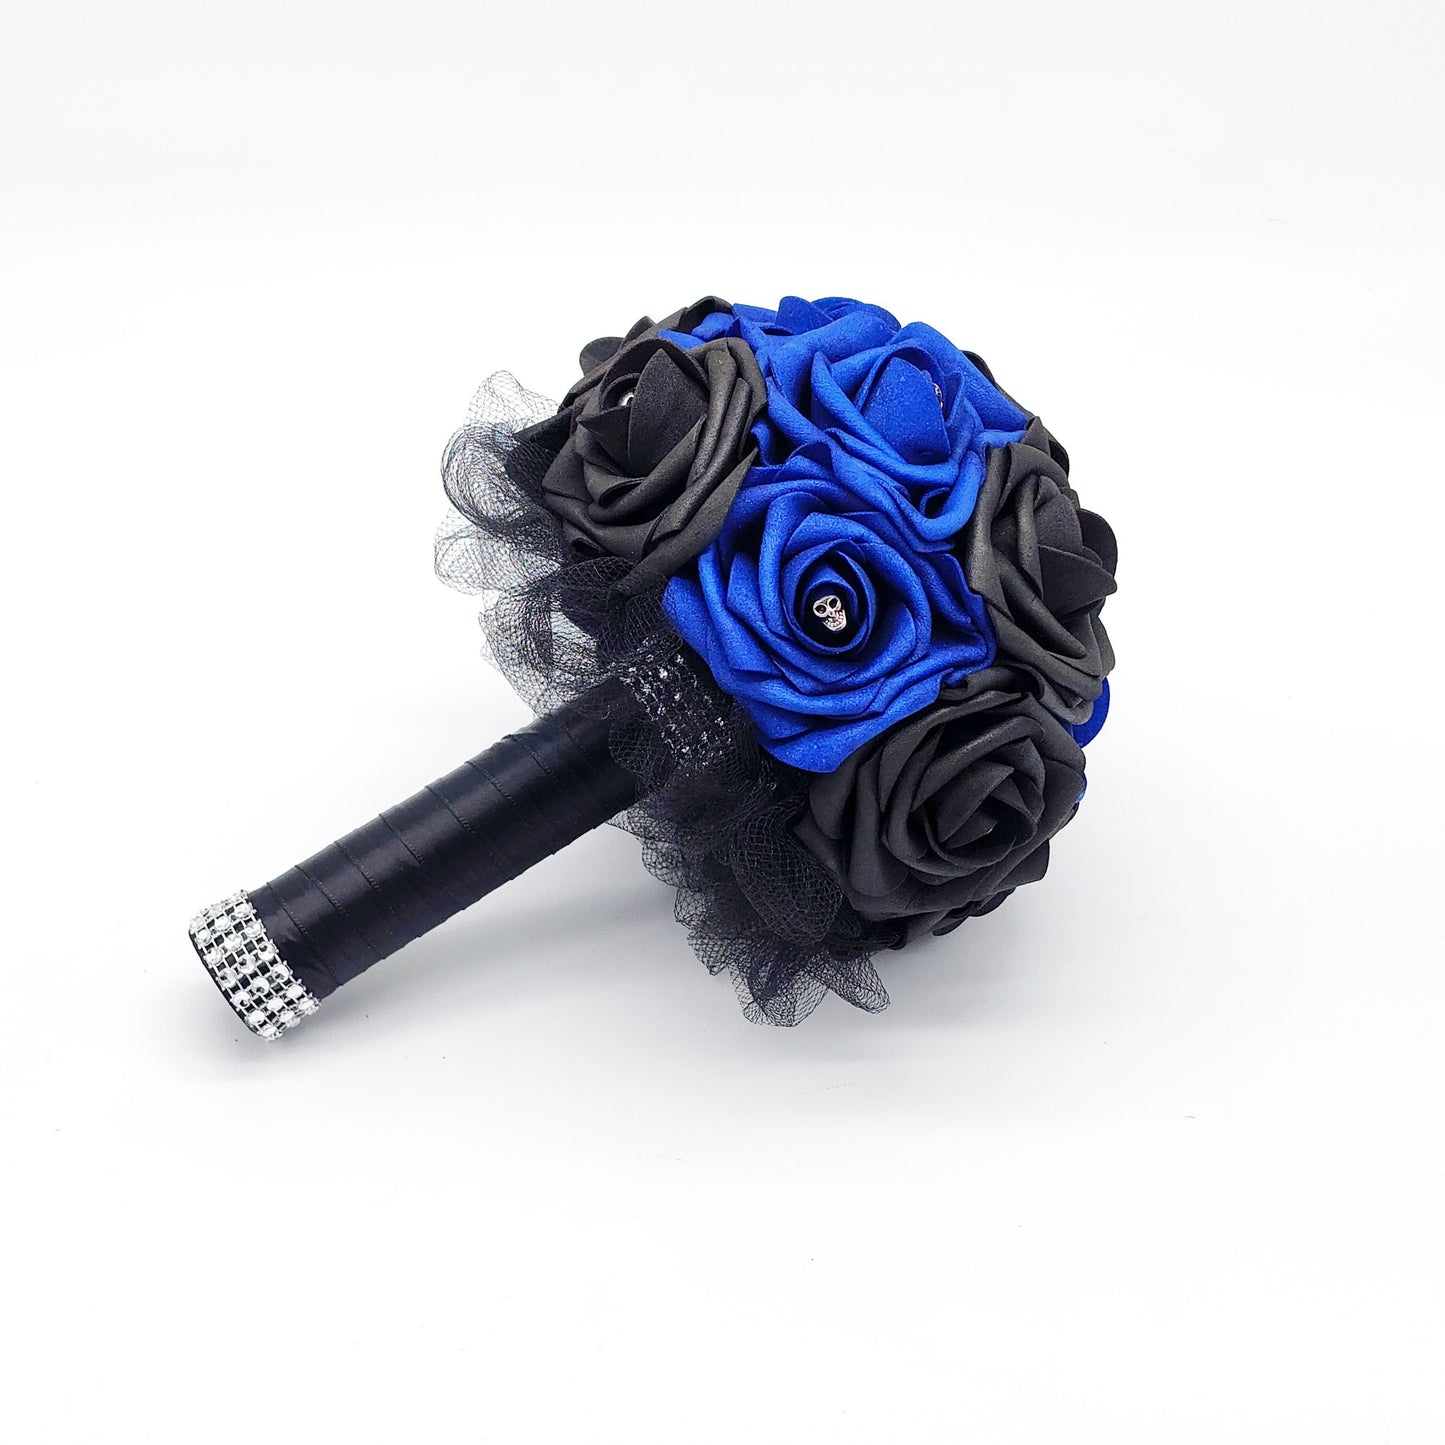 royal blue and black gothic skull bridal bouquet. made with real touch roses. black tulle and ribbon are covering the handle. silver skulls are scattered throughout